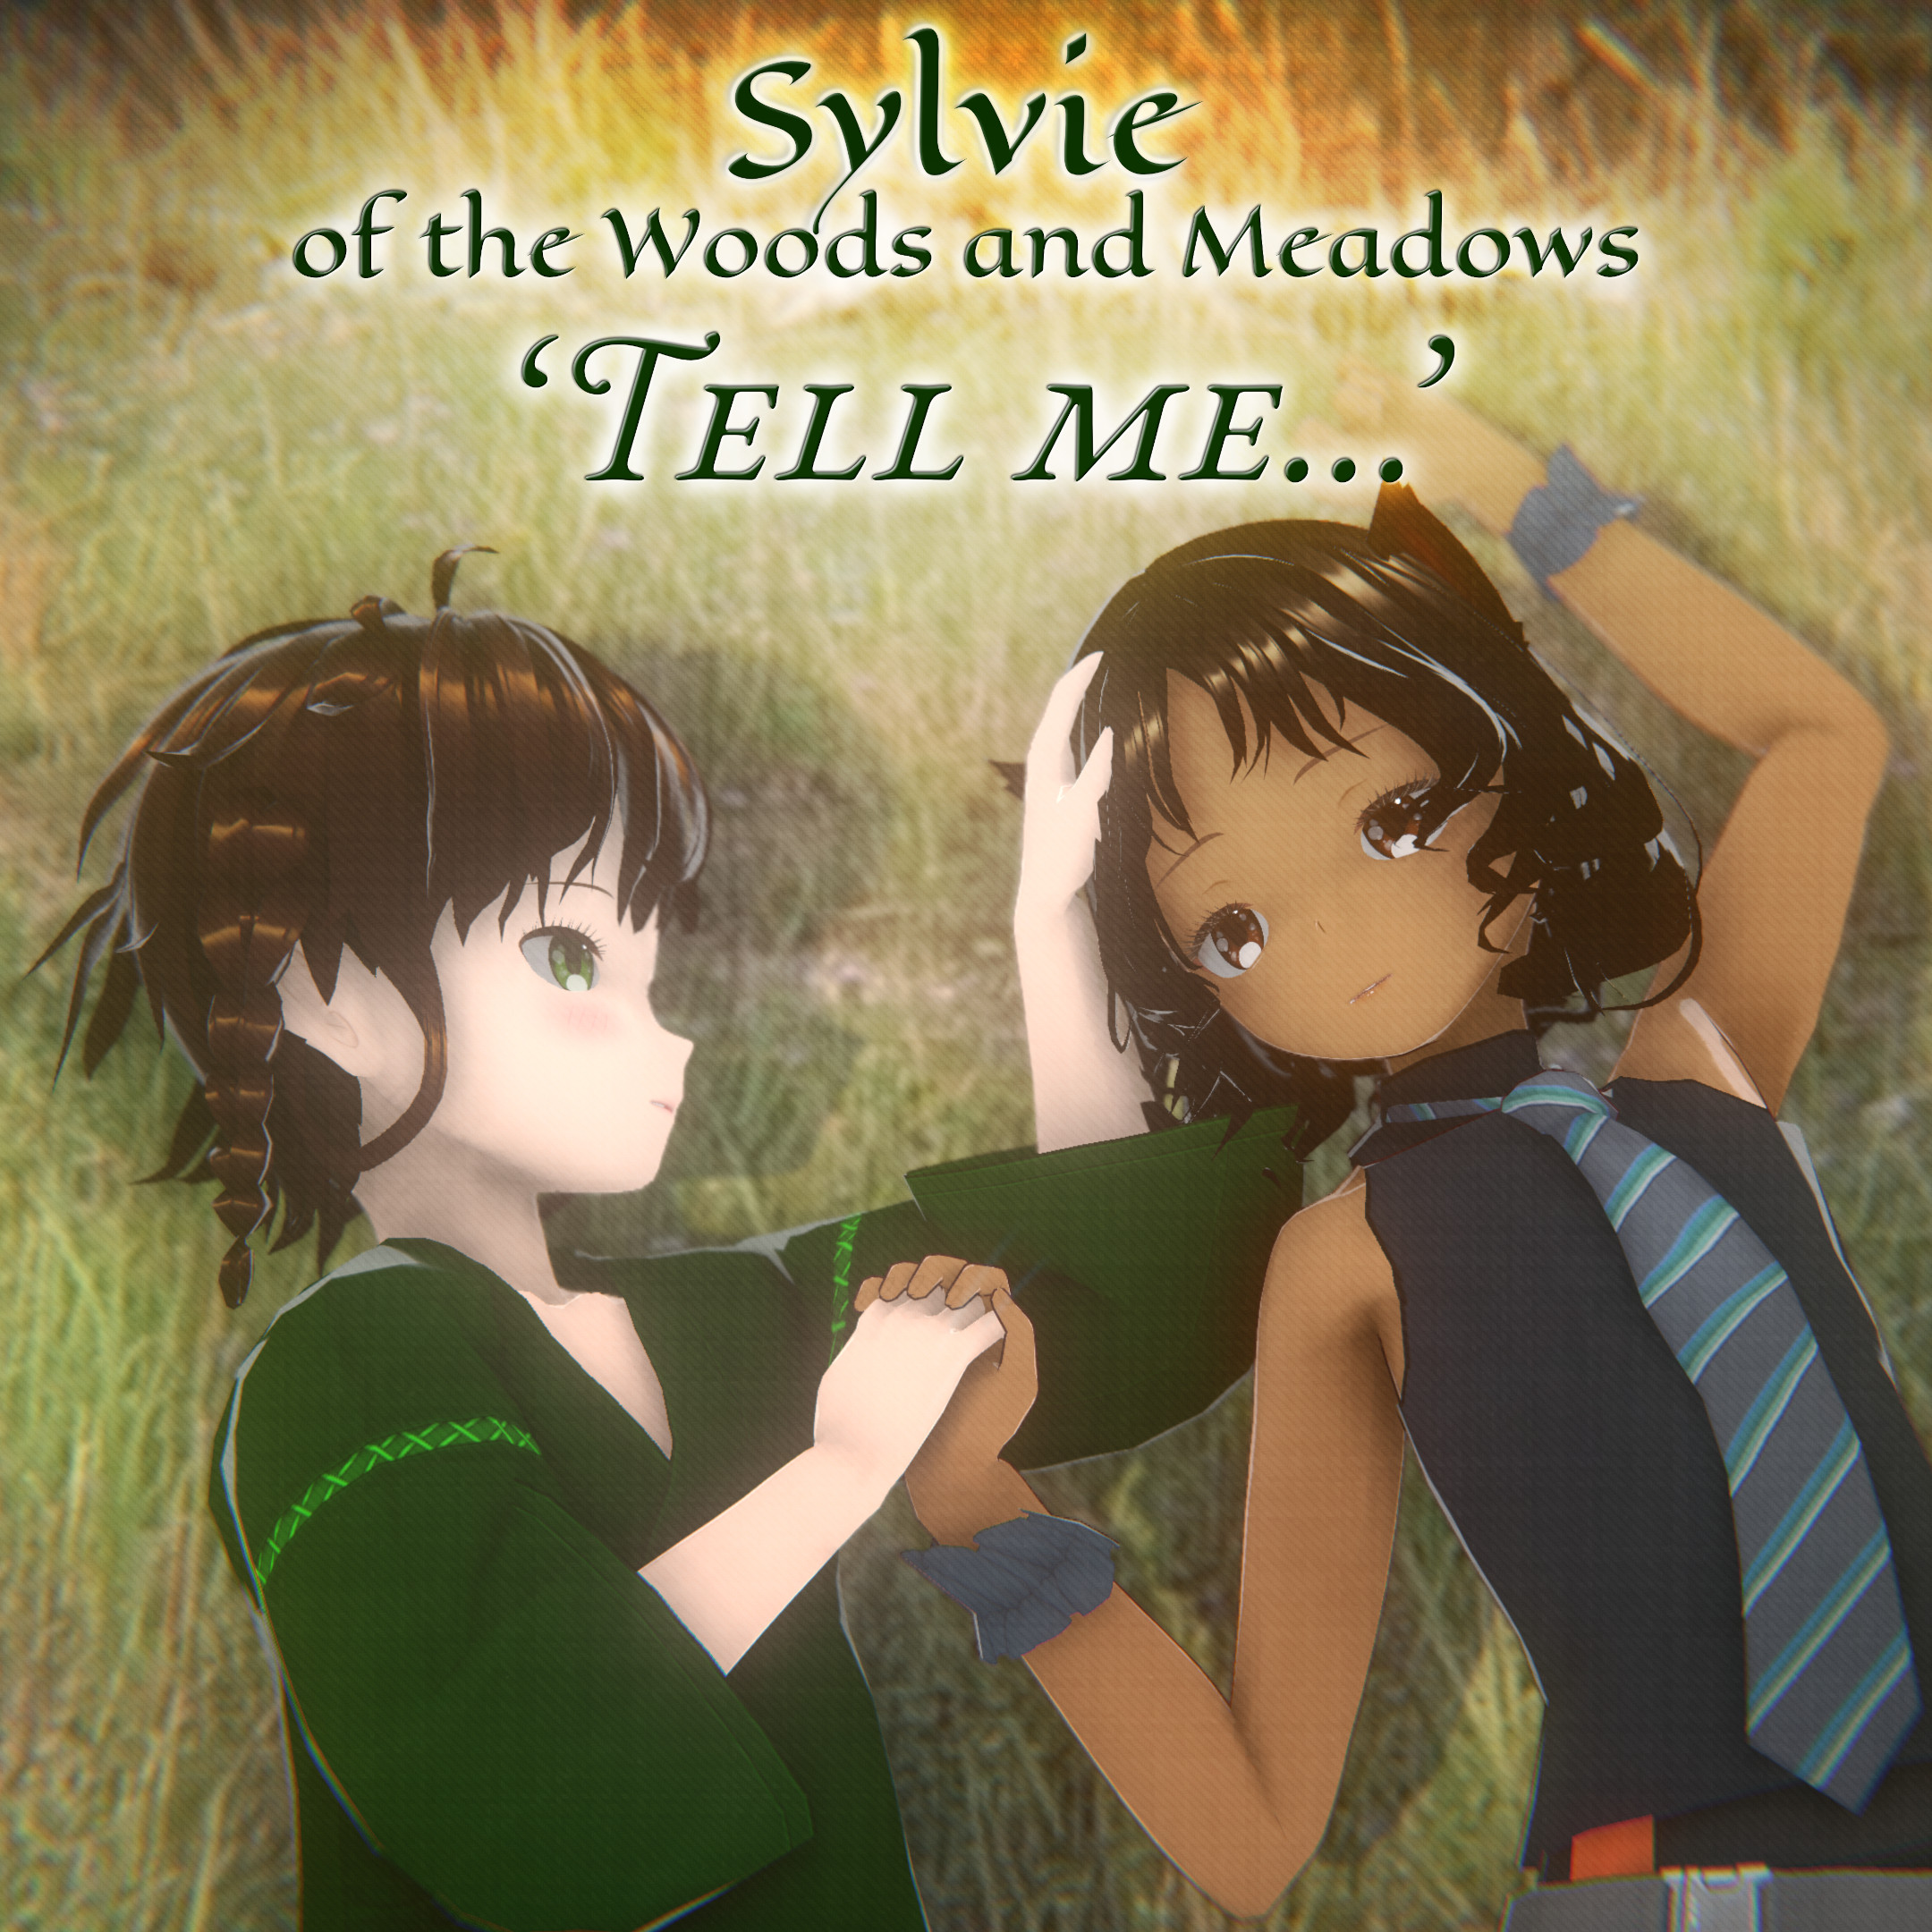 Cover of 'Tell Me', by Sylvie of the Woods and Meadows. The cover shows a 3D render of the characters Sylvie and Lira, lying together on the grass. Sylvie, with brown hair in braided pigtails, light skin, and green eyes, is lying turned toward Lira, with one hand on Lira's hair and the other in Lira's hand. Sylvie is wearing a loose-fit green shirt. Lira, with brown hair, light brown skin, and brown eyes, shoulder length hair, and cat ears, is wearing a sleeveless black top and a blue and gray striped necktie, and is looking up from the ground at an angle. Both look relaxed and happy.